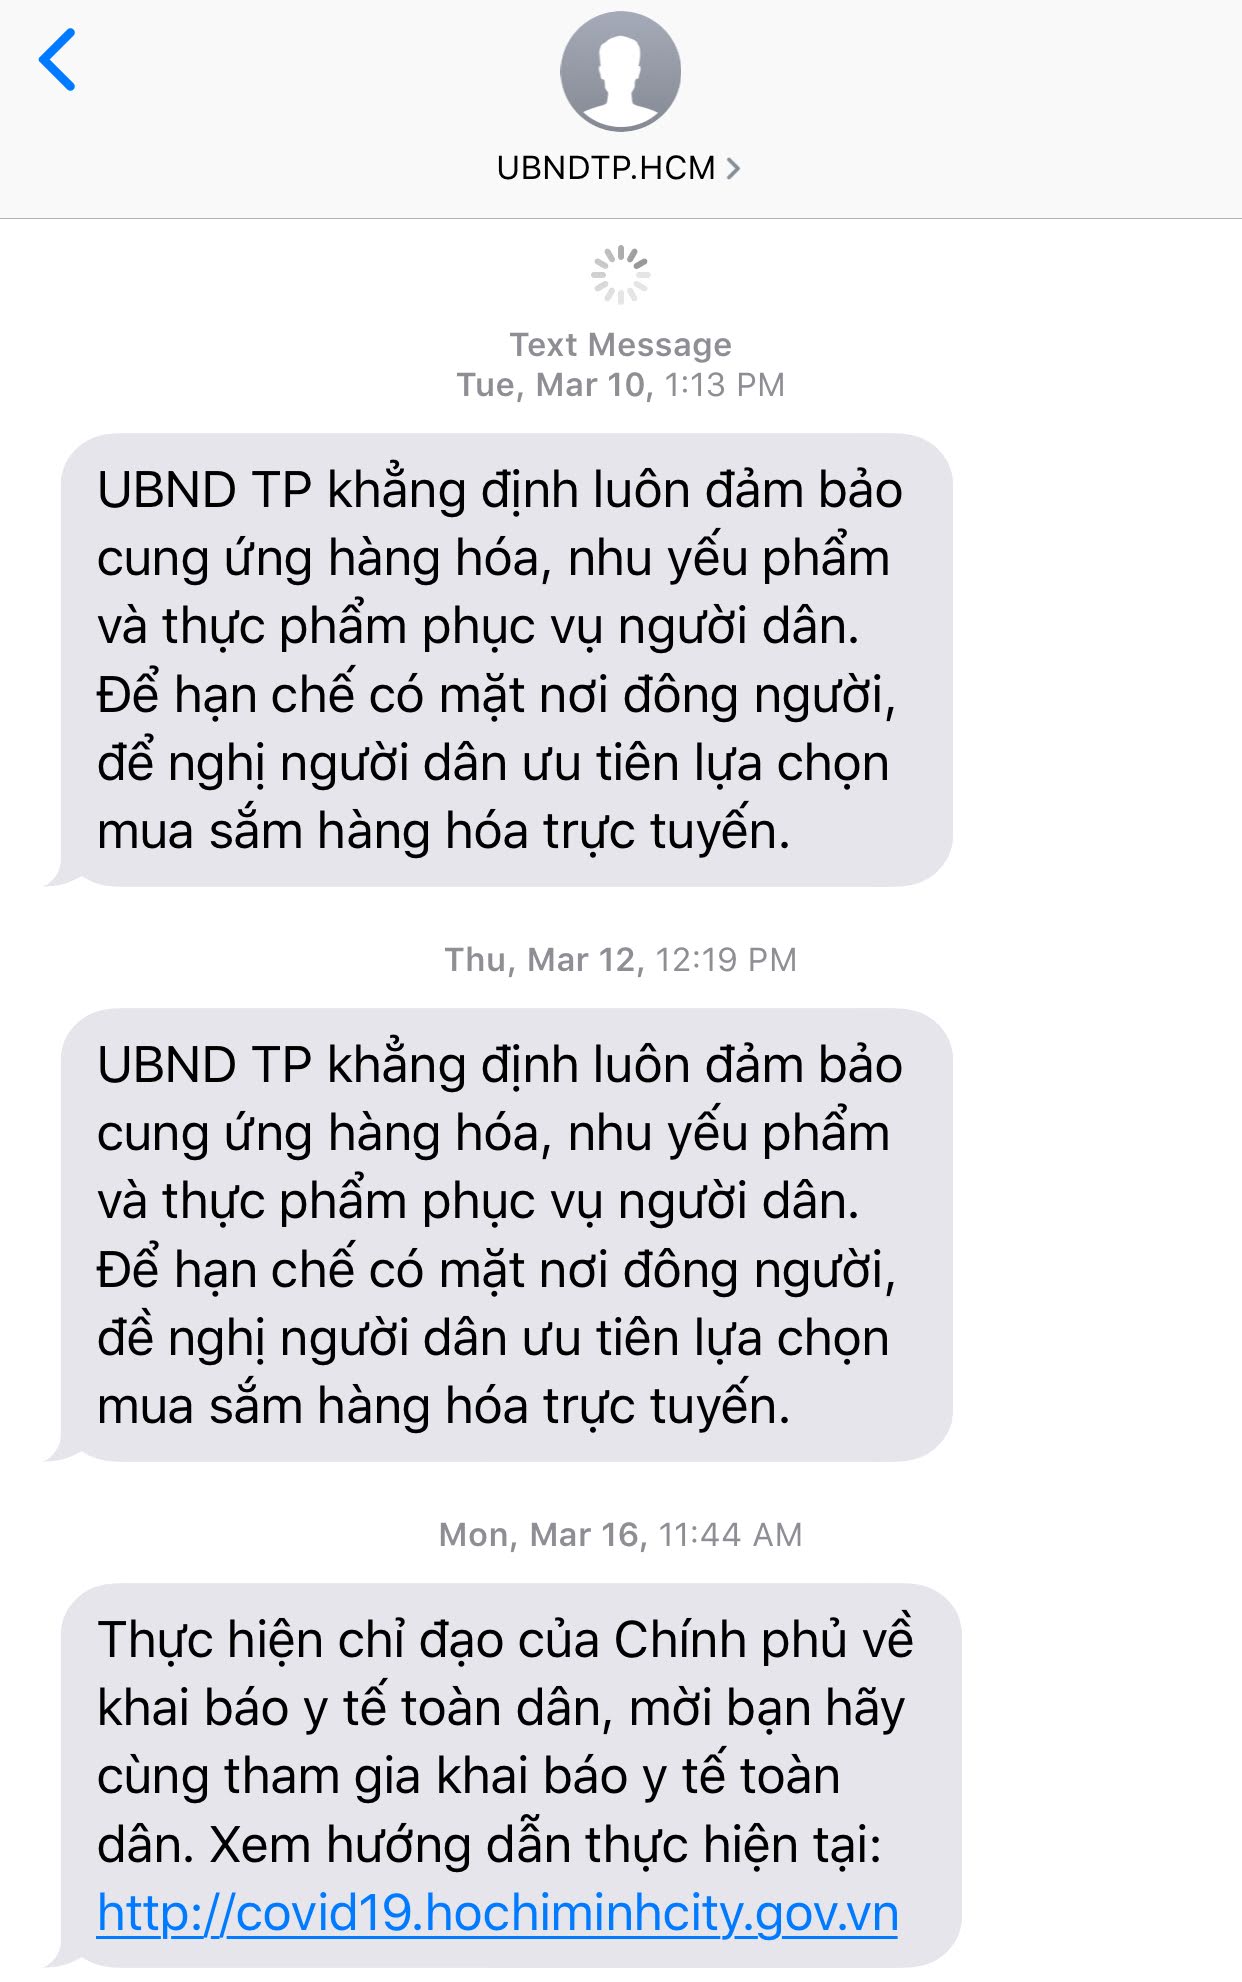 A screenshot shows message from Ho Chi Minh City's People's Committee to a citizen, with the first two ensuring to sufficiently supply of goods, necessities and food for people living in the metropolis, while the last calls on people for medical declaration